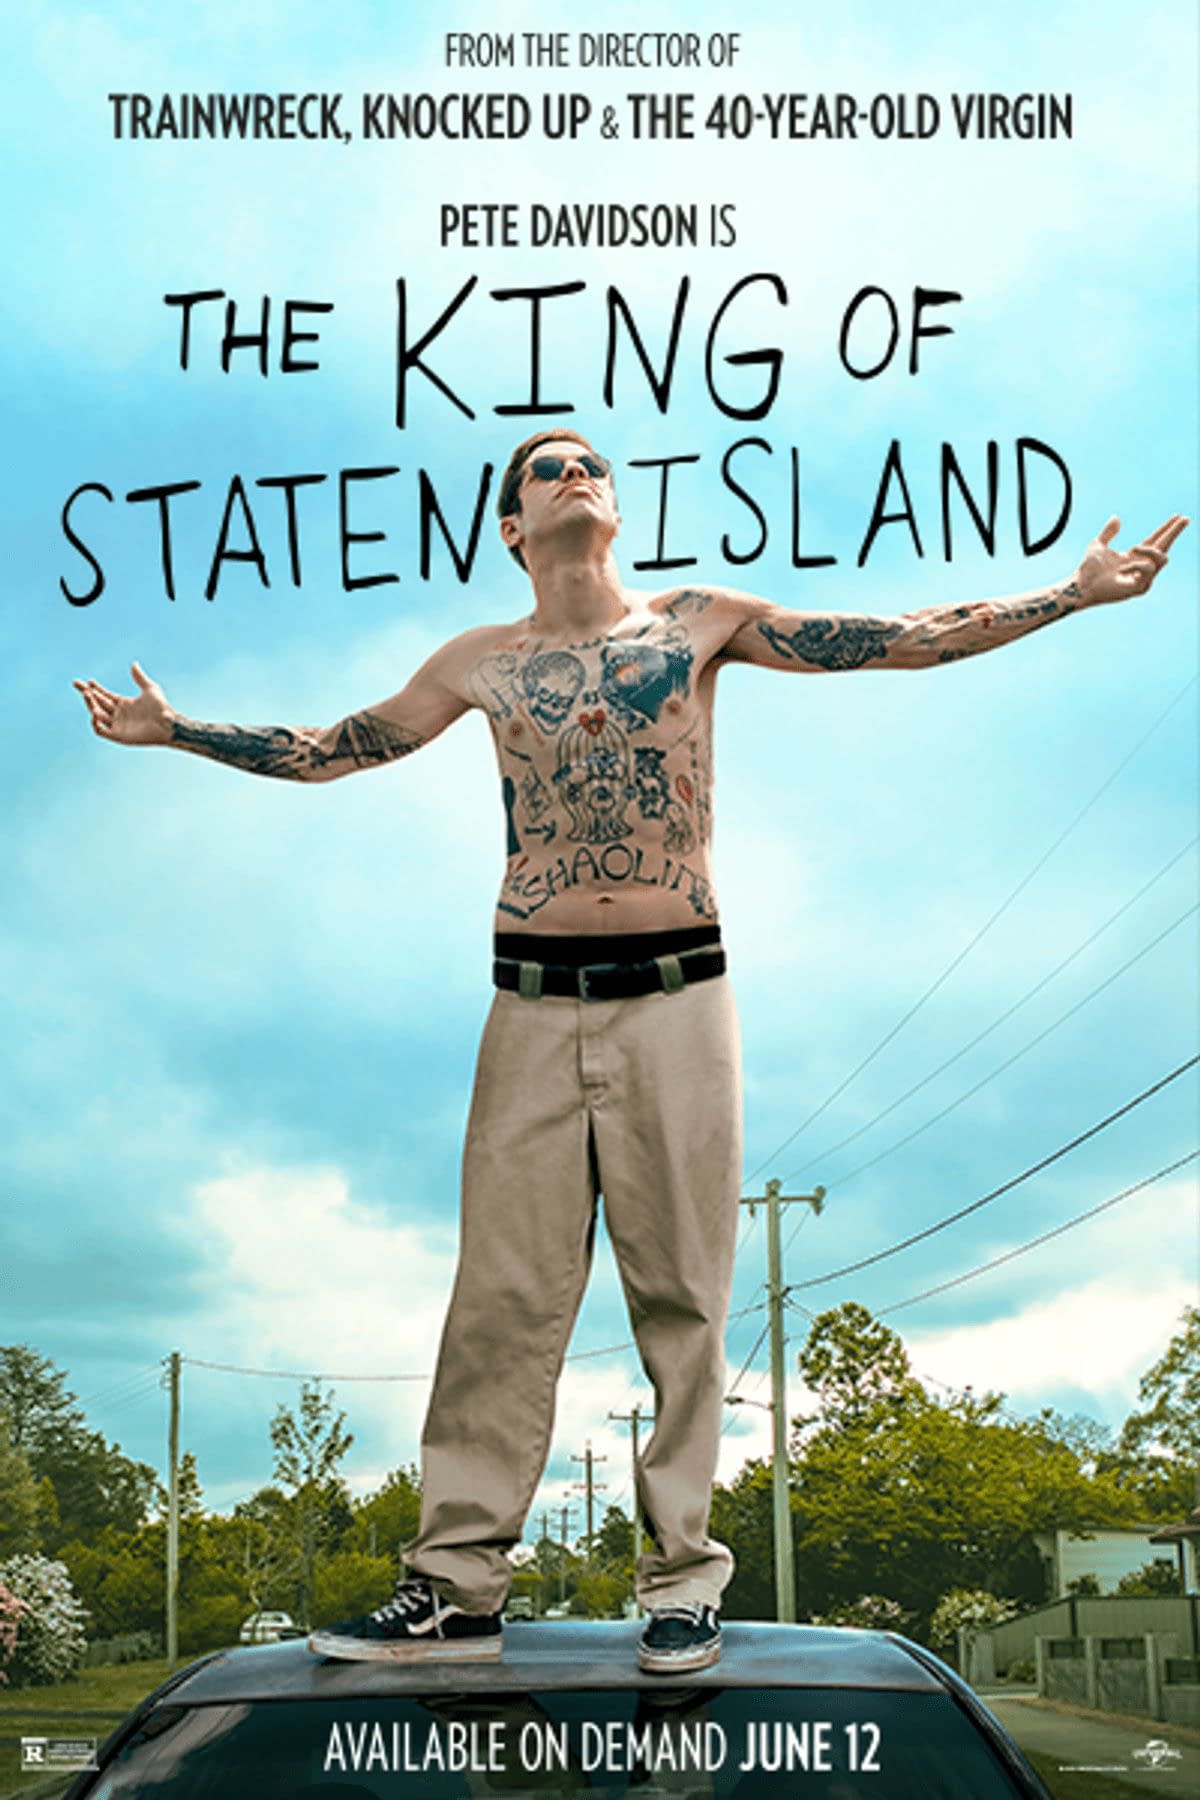 The King Of Staten Island Trailer Is Here, Film Hits VOD June 12th